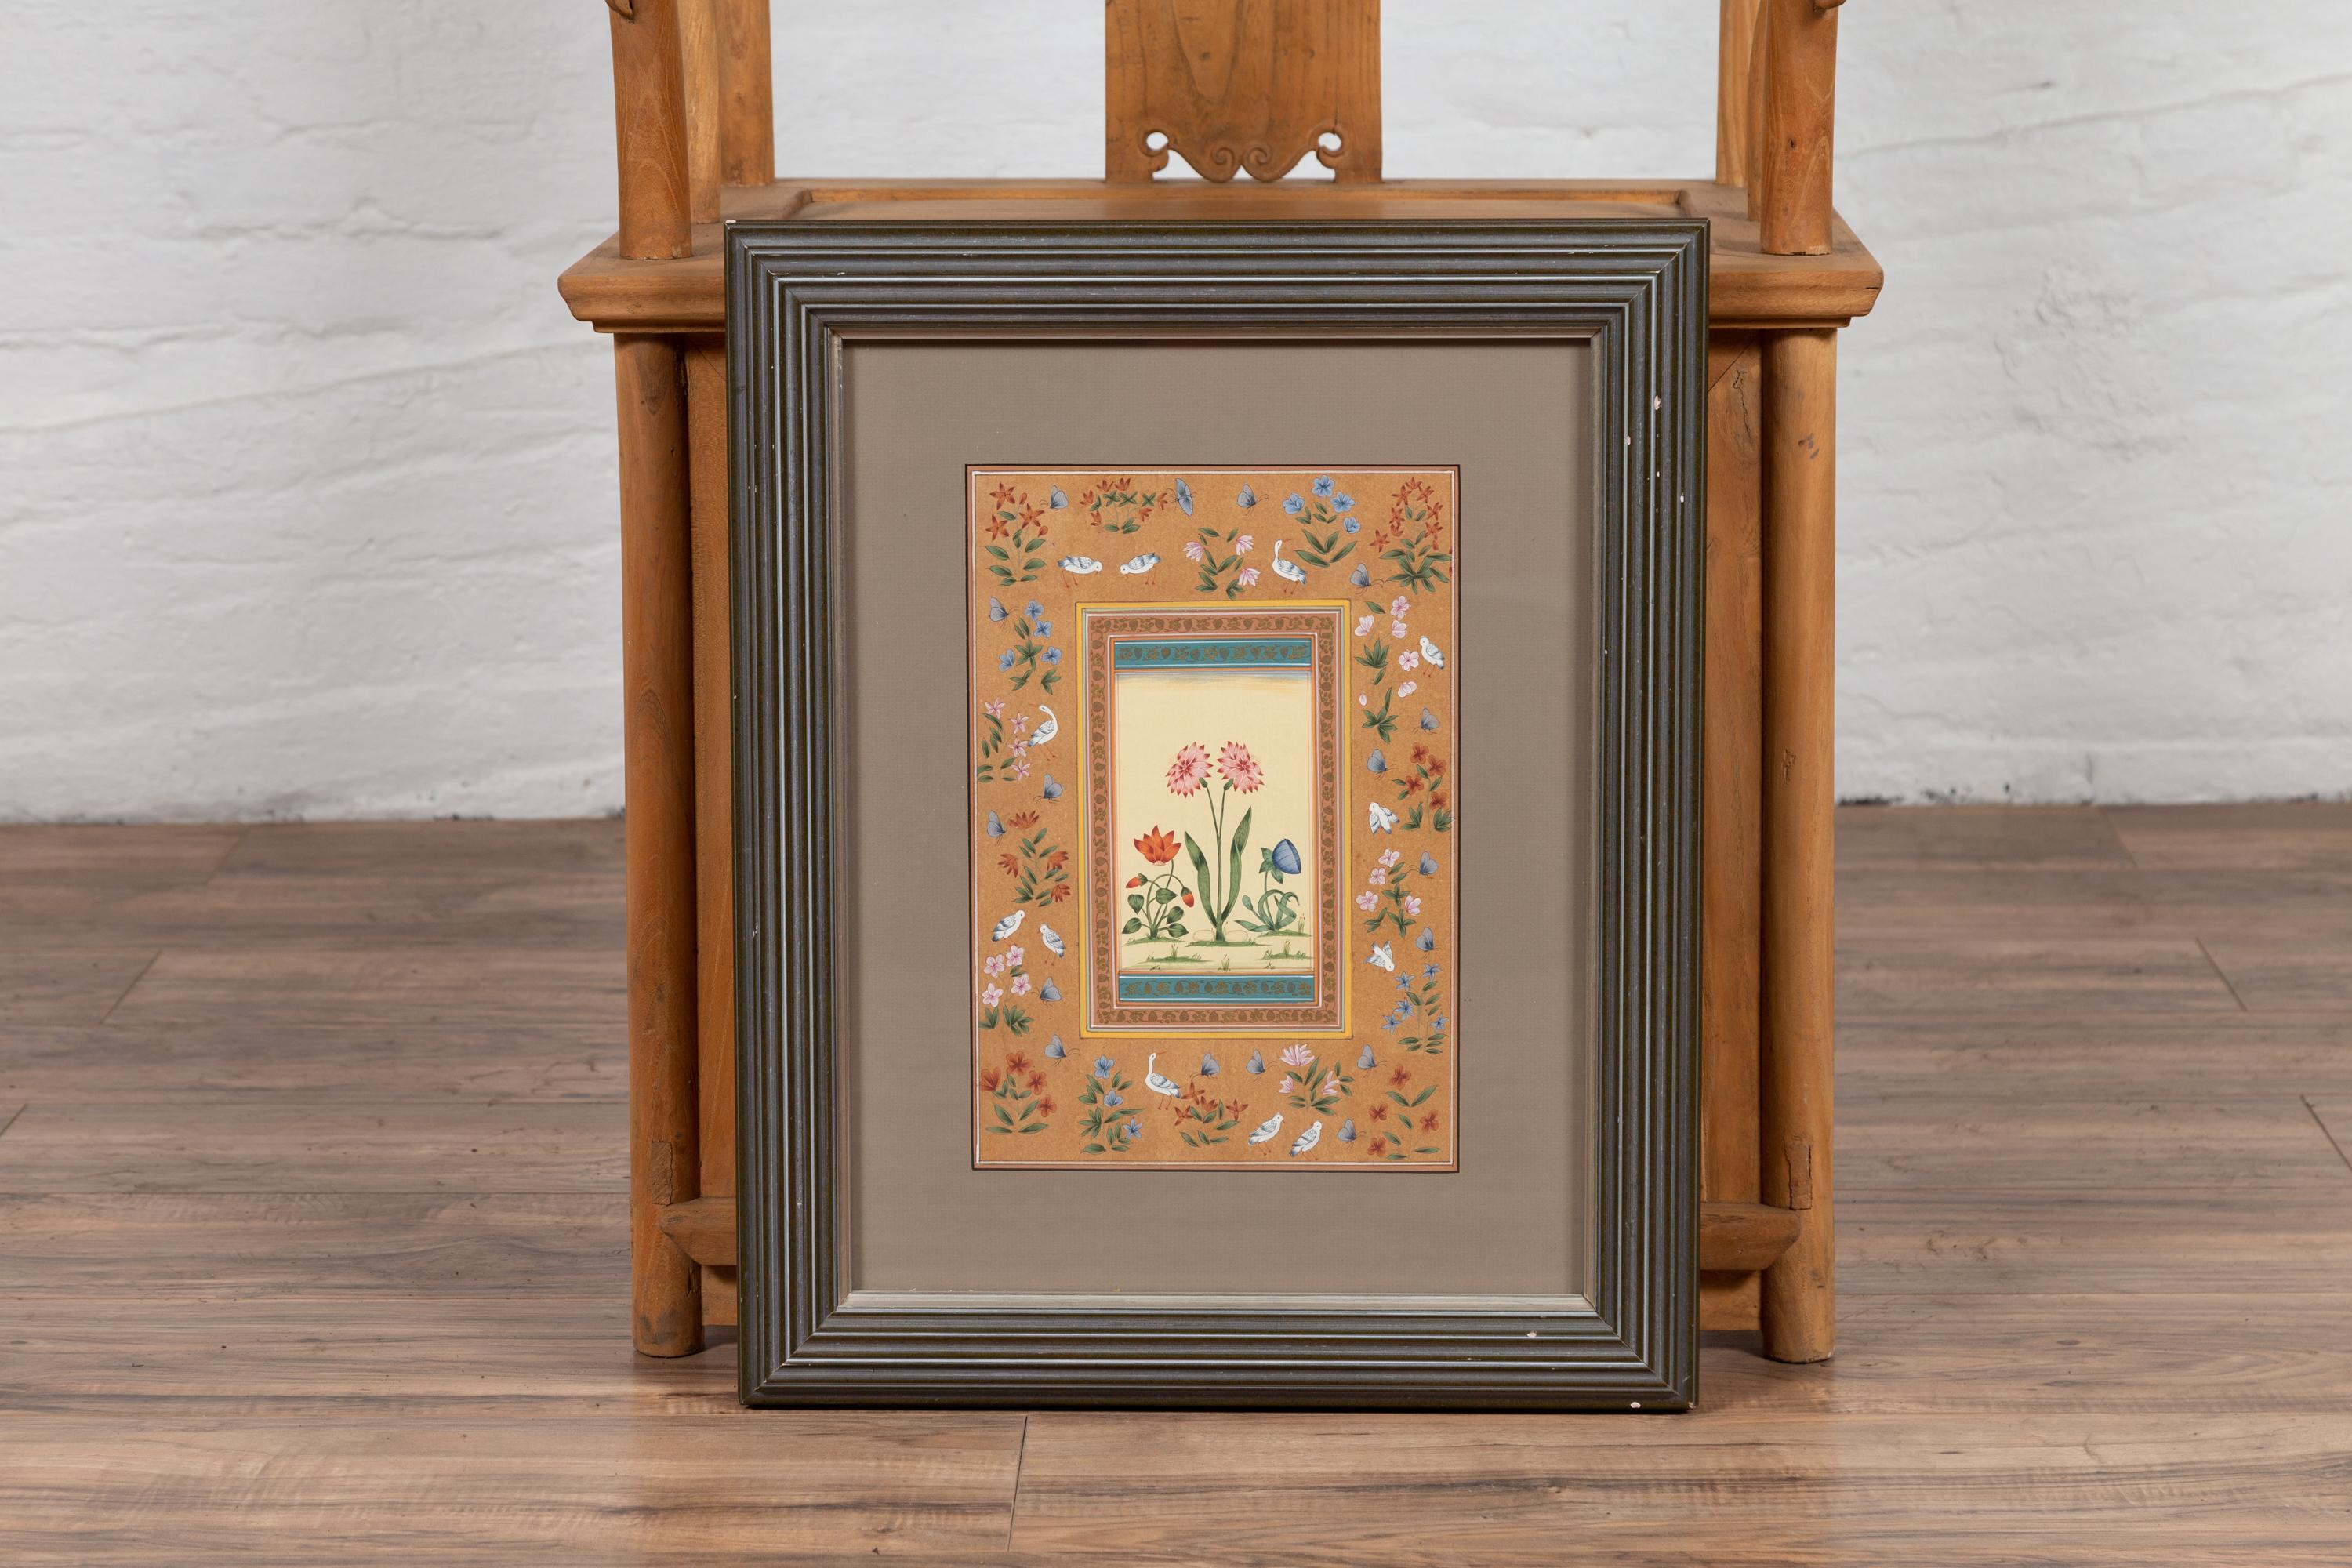 Painted Indian Floral Still-Life from the Midcentury Period with Flowers and Birds